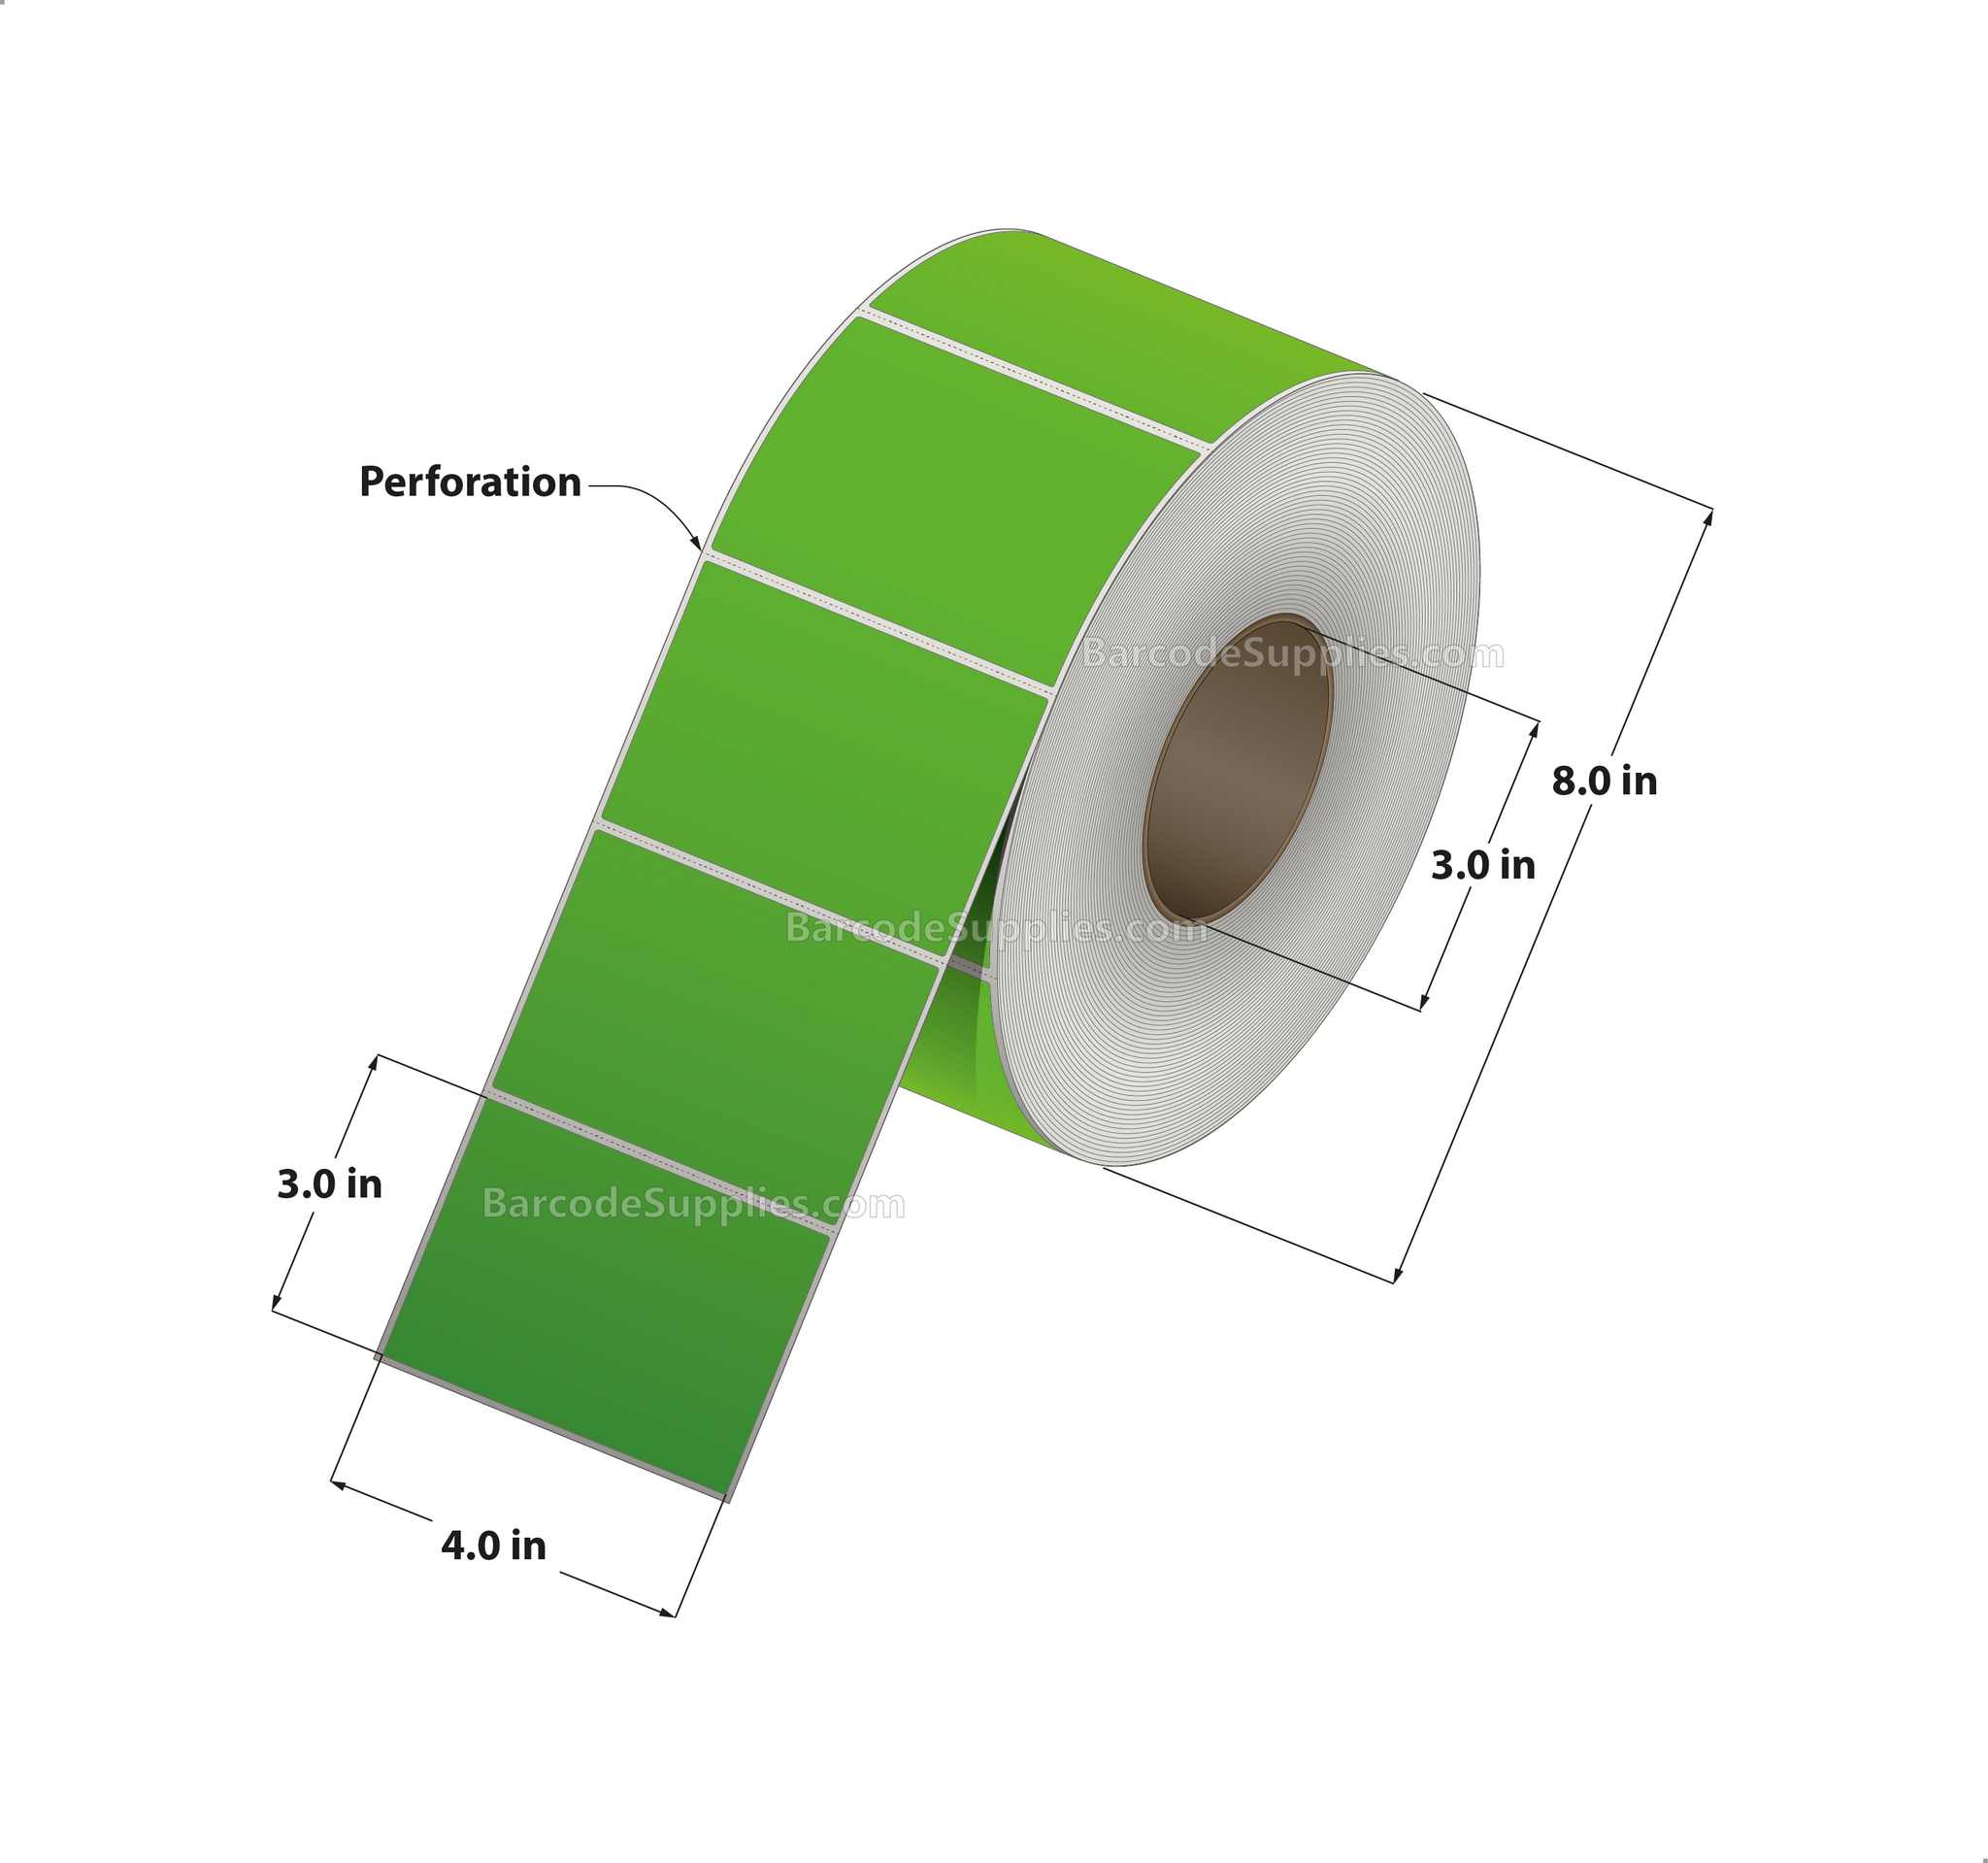 Products 4 x 4 Thermal Transfer Fluorescent Green Labels With Permanent Acrylic Adhesive - Perforated - 1500 Labels Per Roll - Carton Of 4 Rolls - 6000 Labels Total - MPN: TH44-1PFG